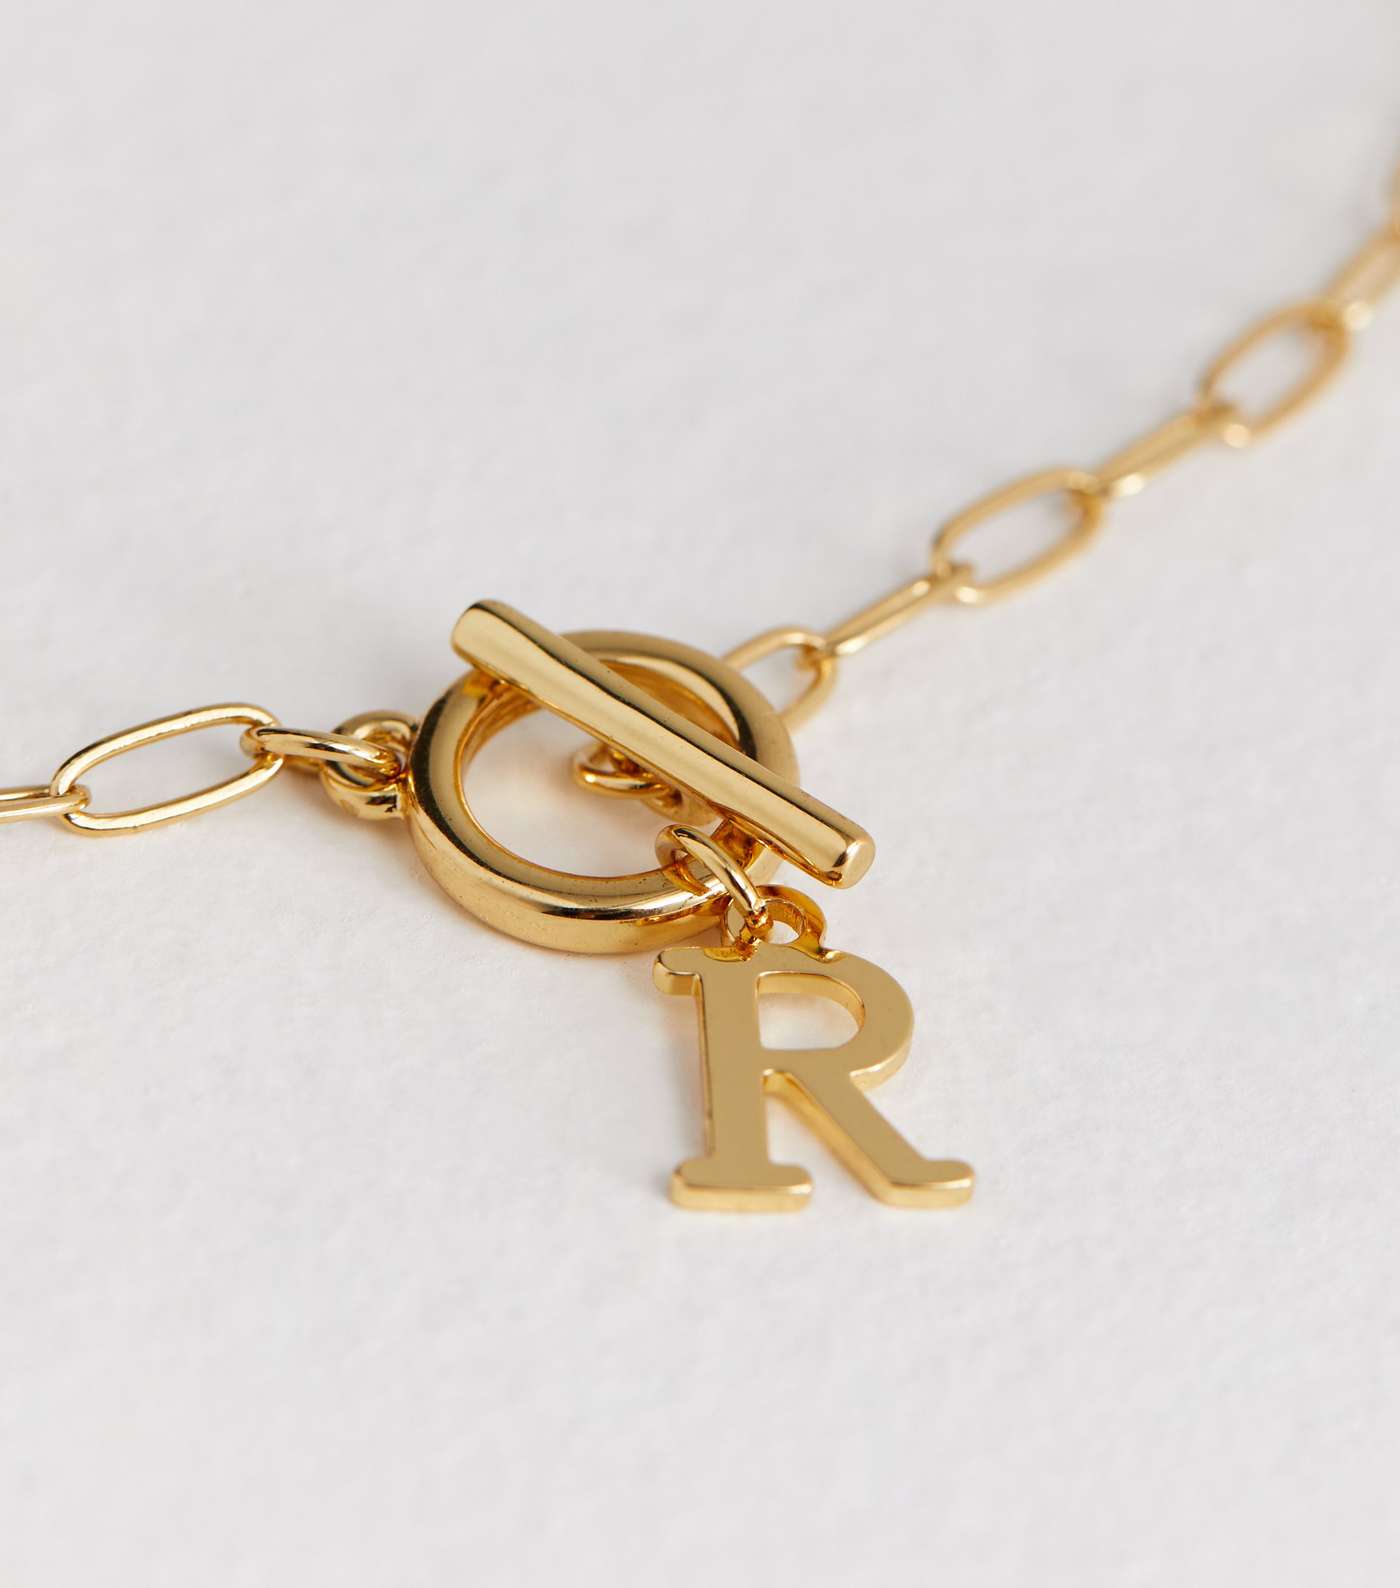 Real Gold Plate R Initial Chain Necklace Image 4